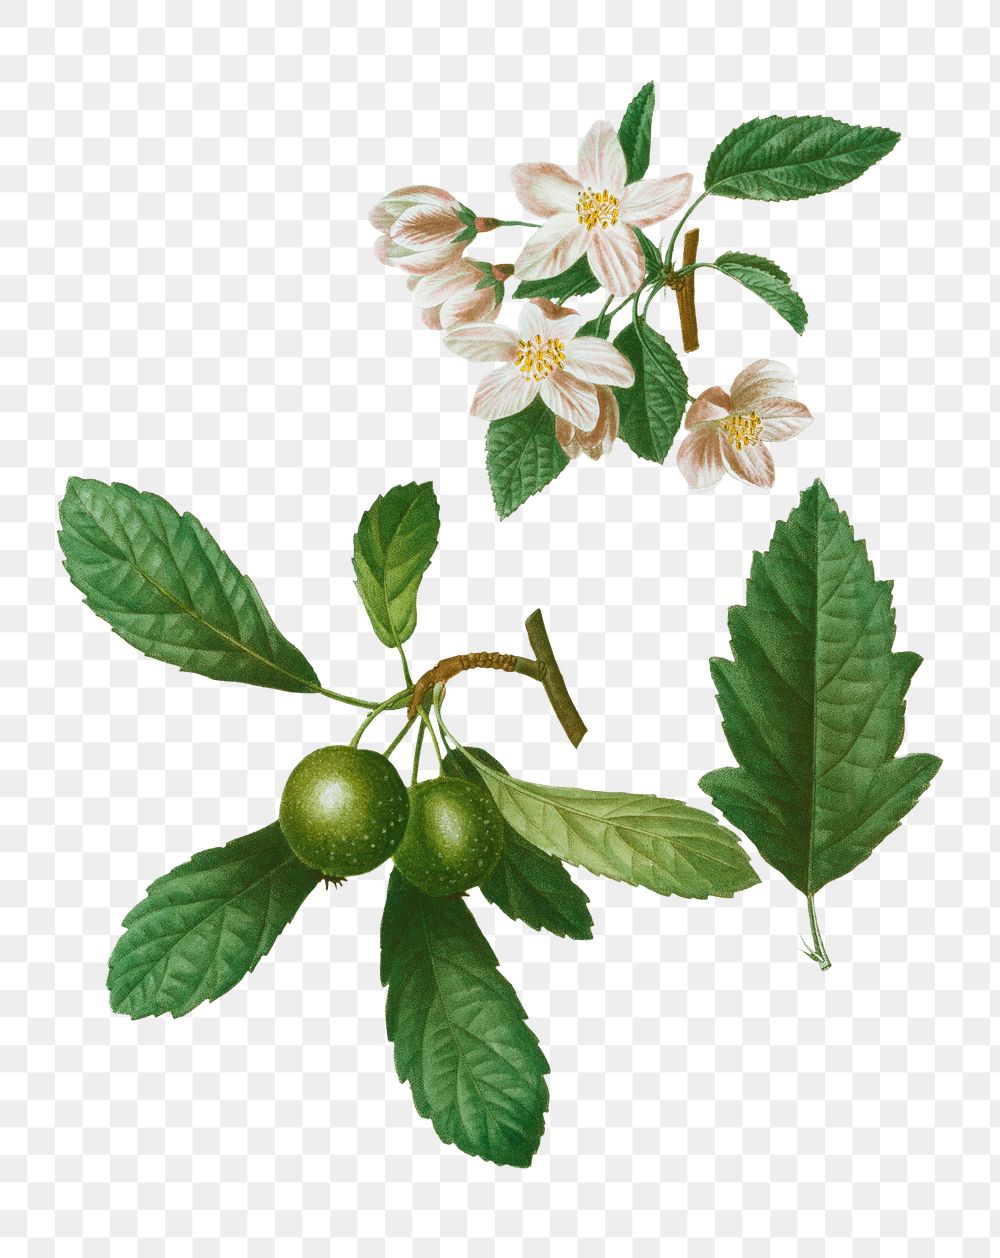 Southern crabapple and Siberian crabapple transparent png